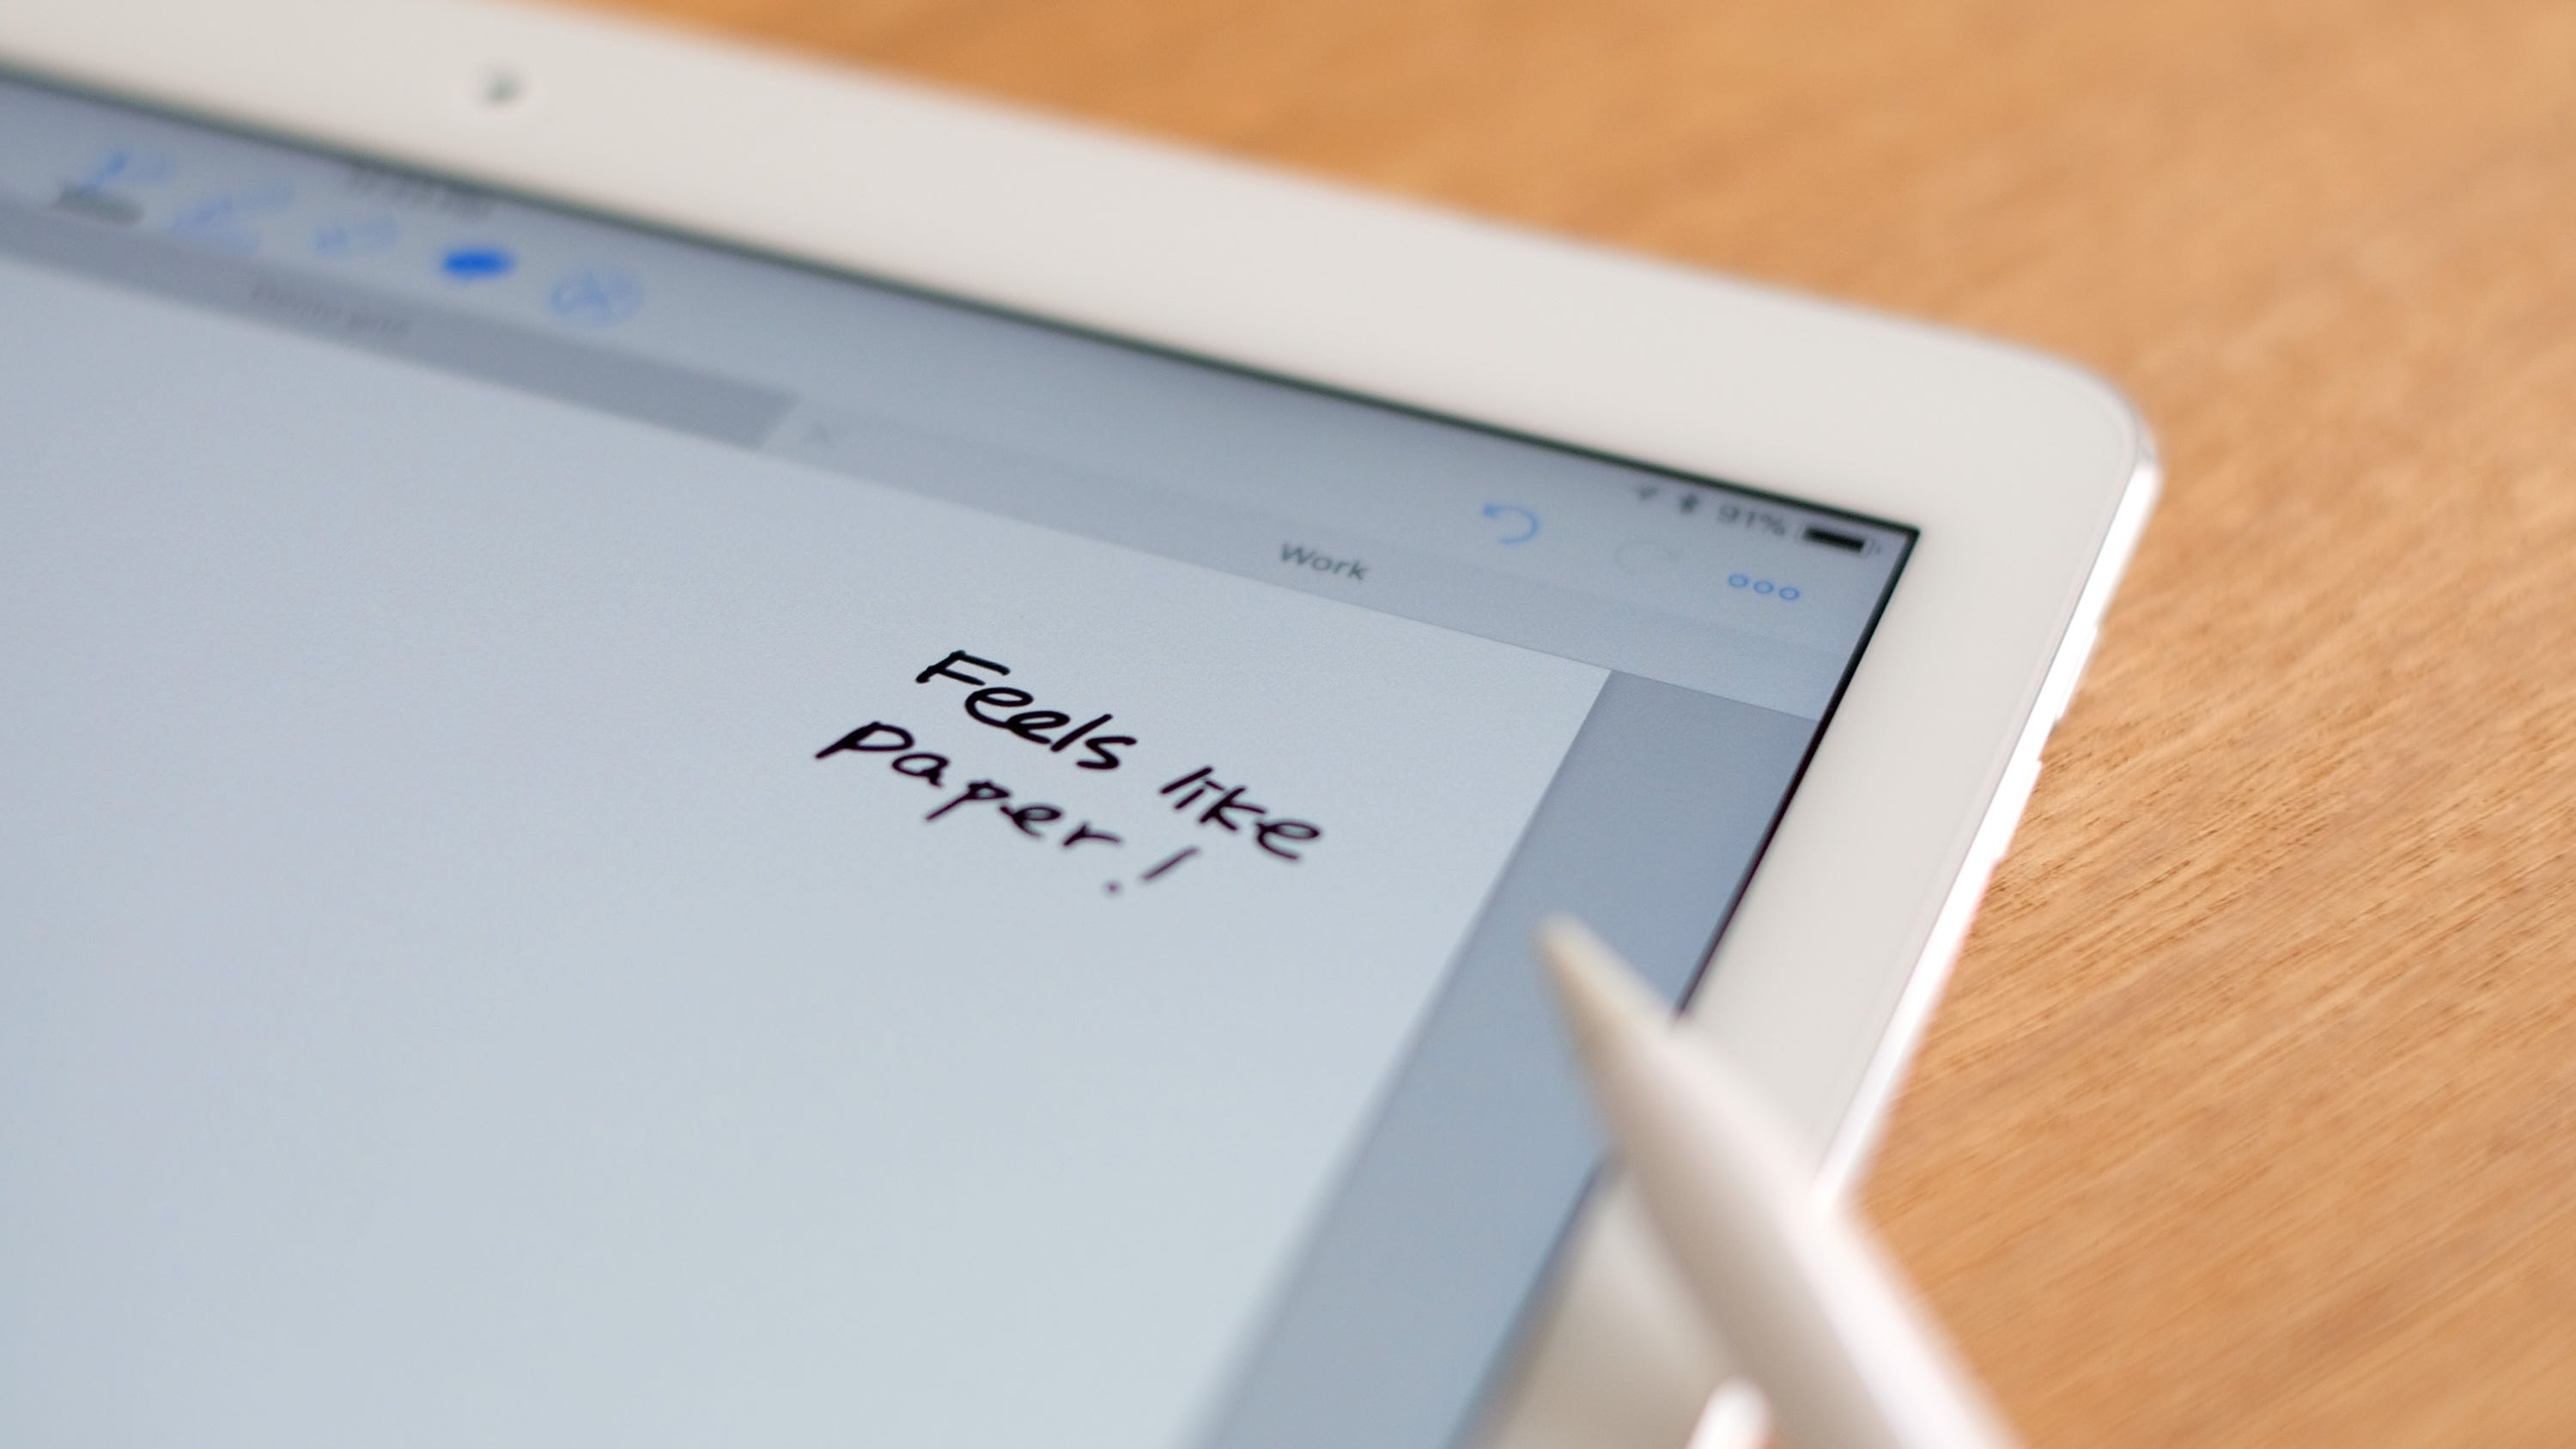 Paperlike Reviewed The Ipad Screen Protector That Promise A Writing Experience Like On Real Paper By Goodnotes Goodnotes Blog